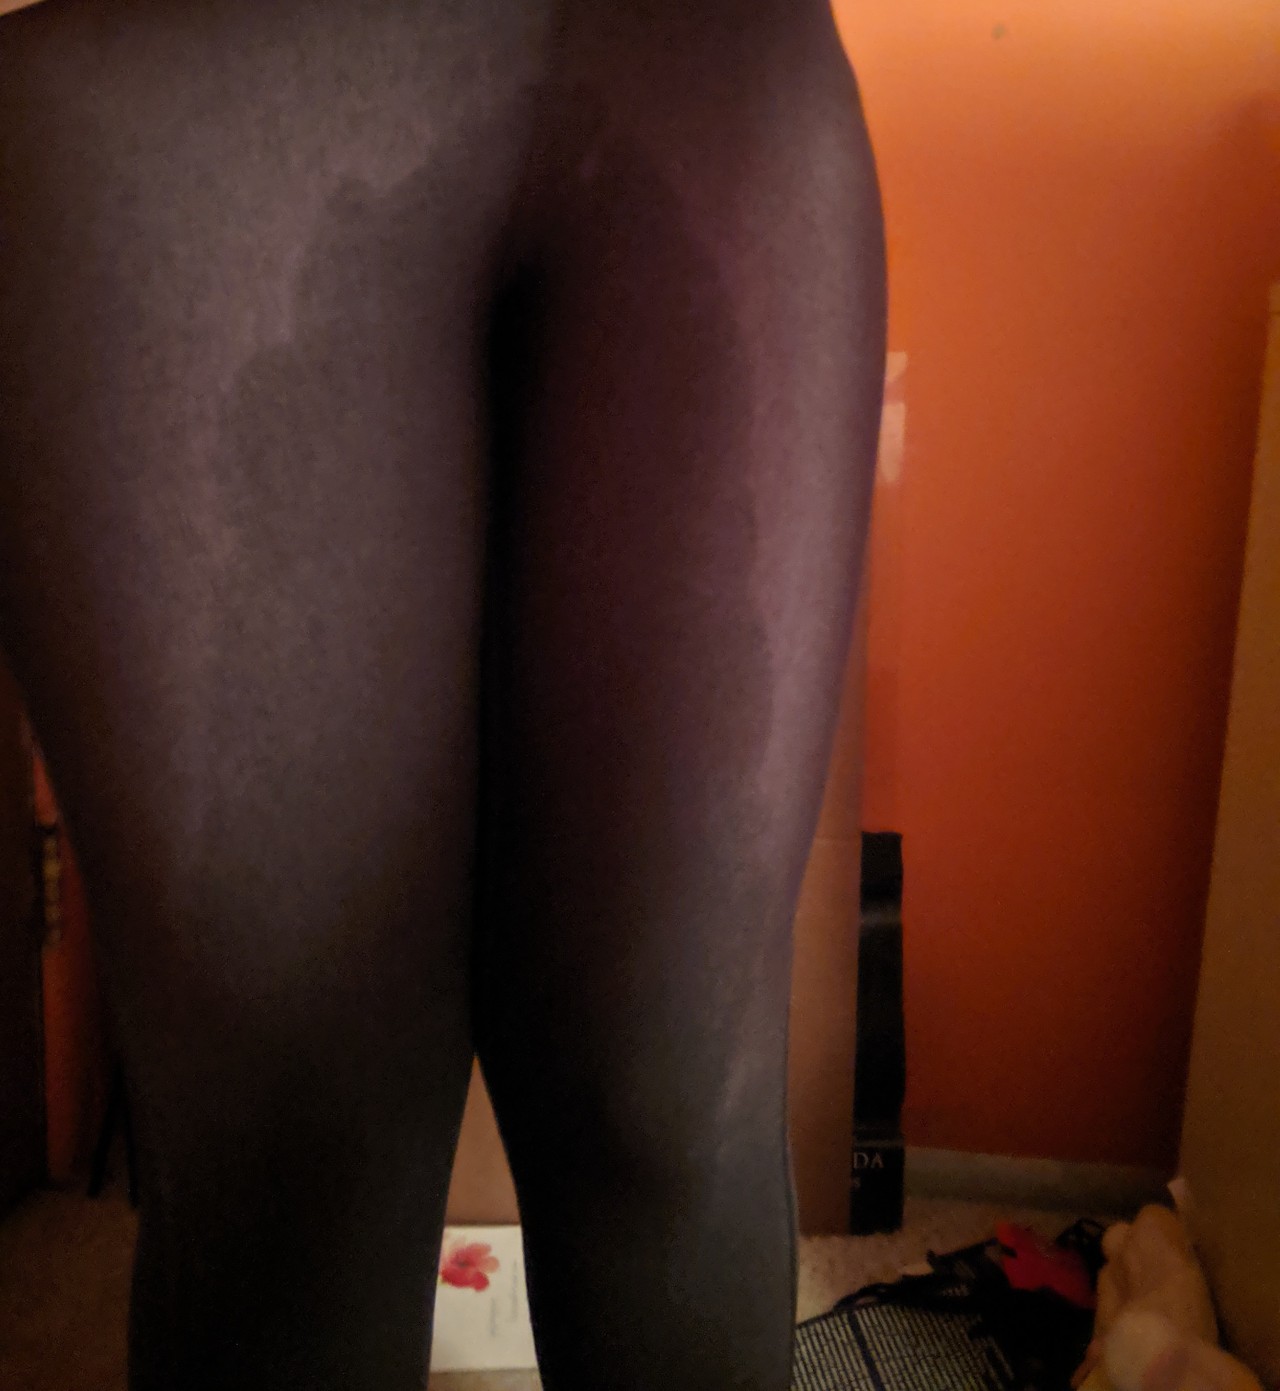 Porn tied-tease:Sorry for the really bad pictures photos